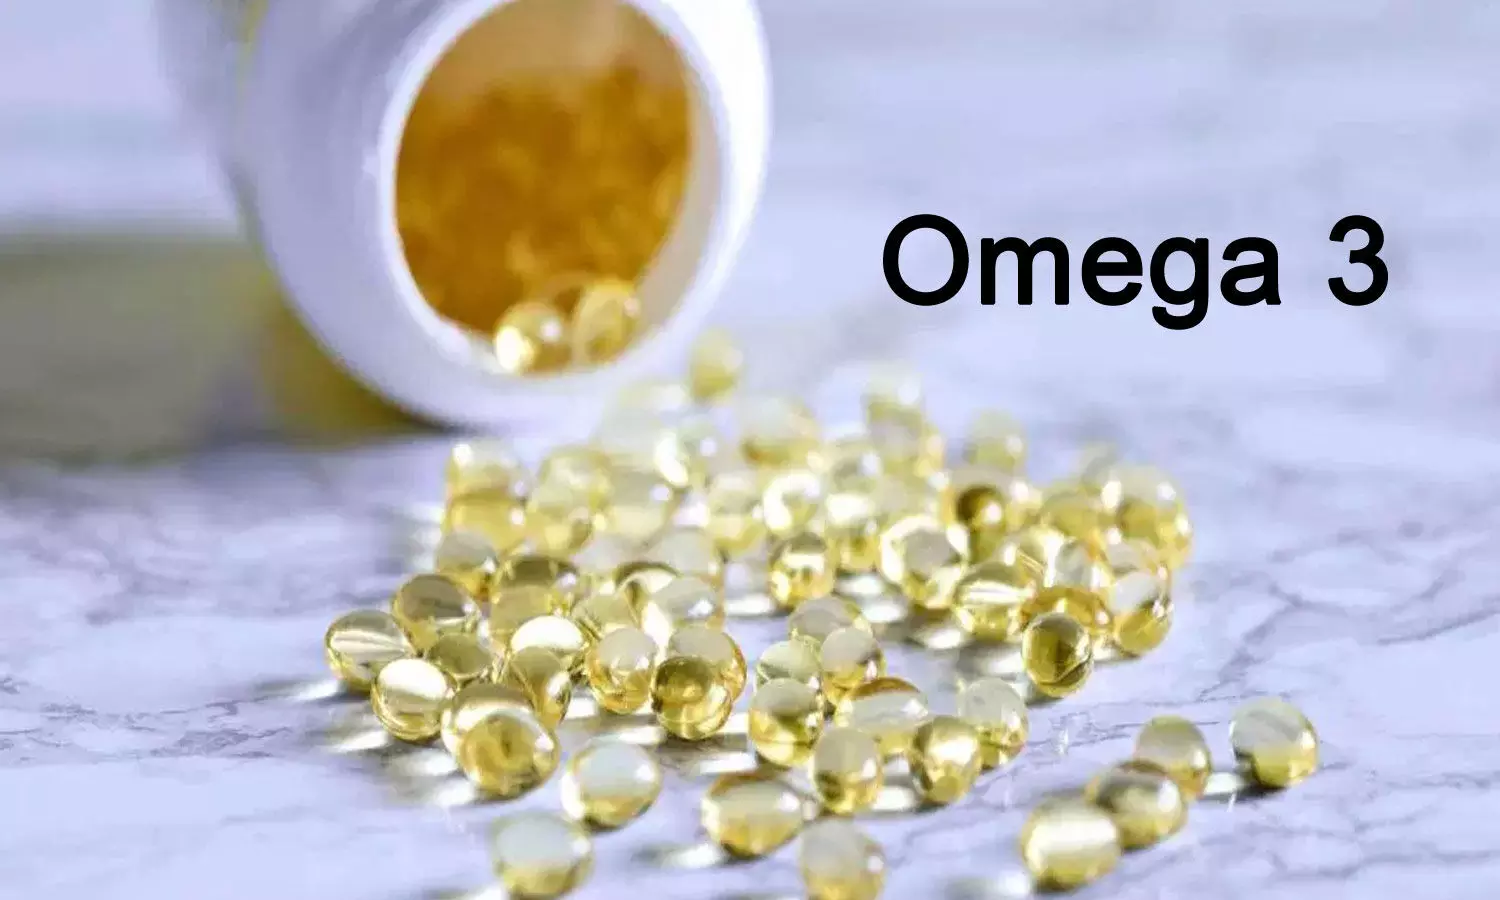 Omega-3 improves sleep quality, mood disorders in breast cancer patients on hormone therapy: Study